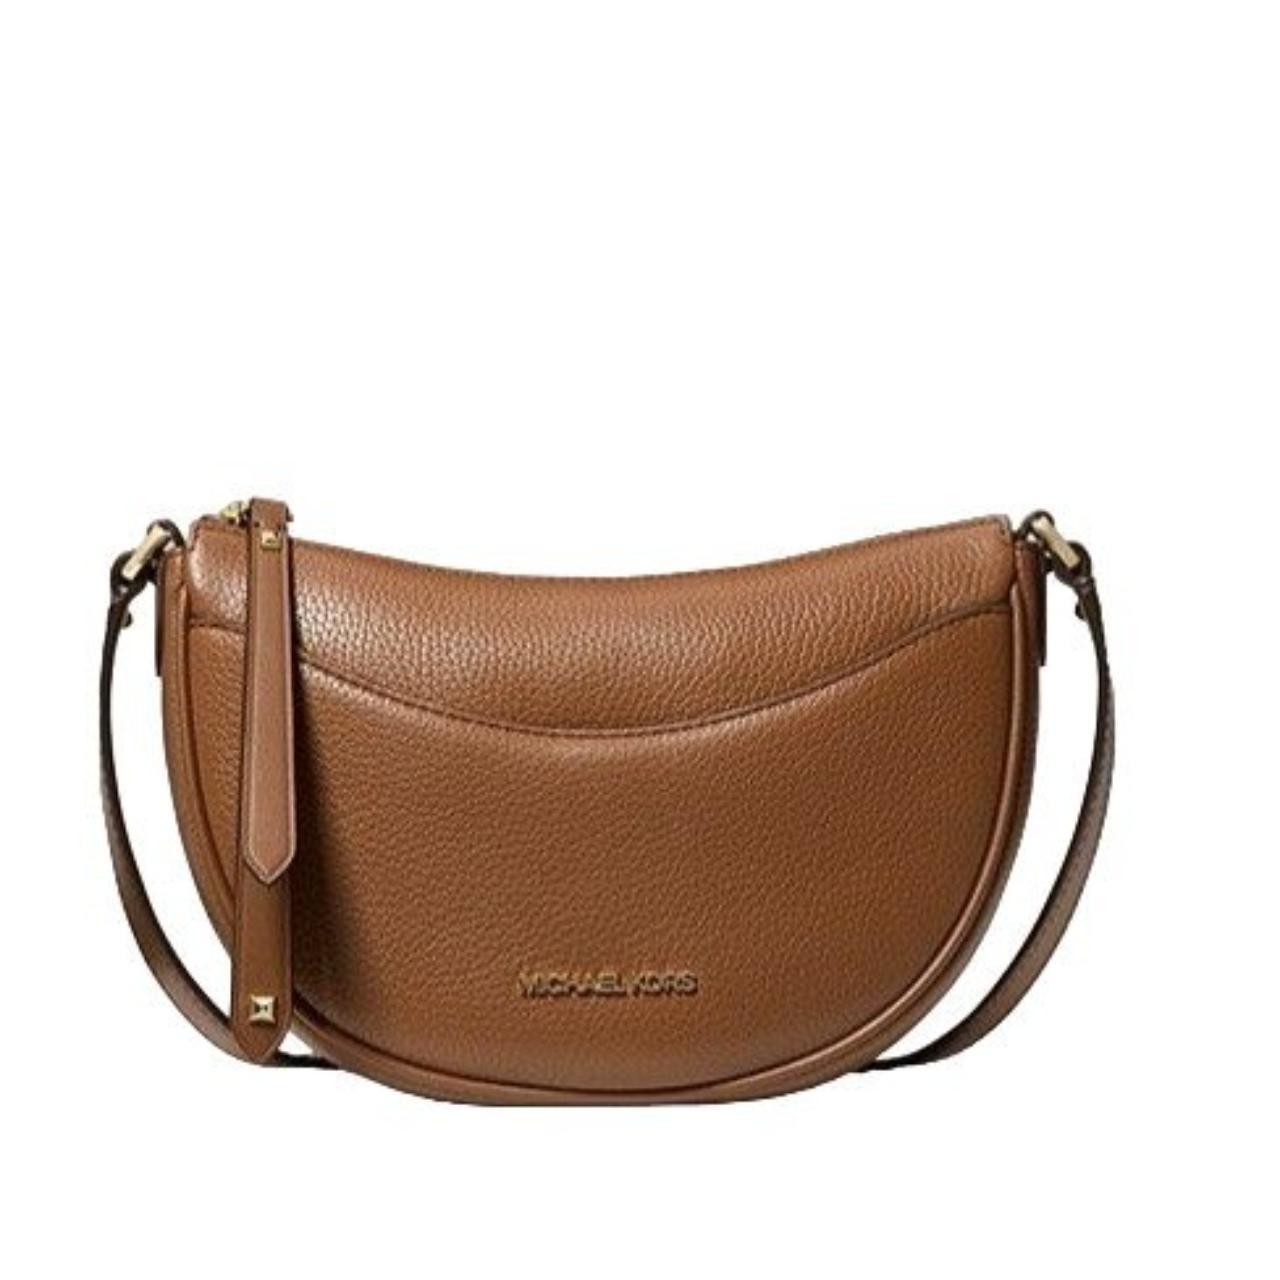 Dover Small Leather Crossbody Bag